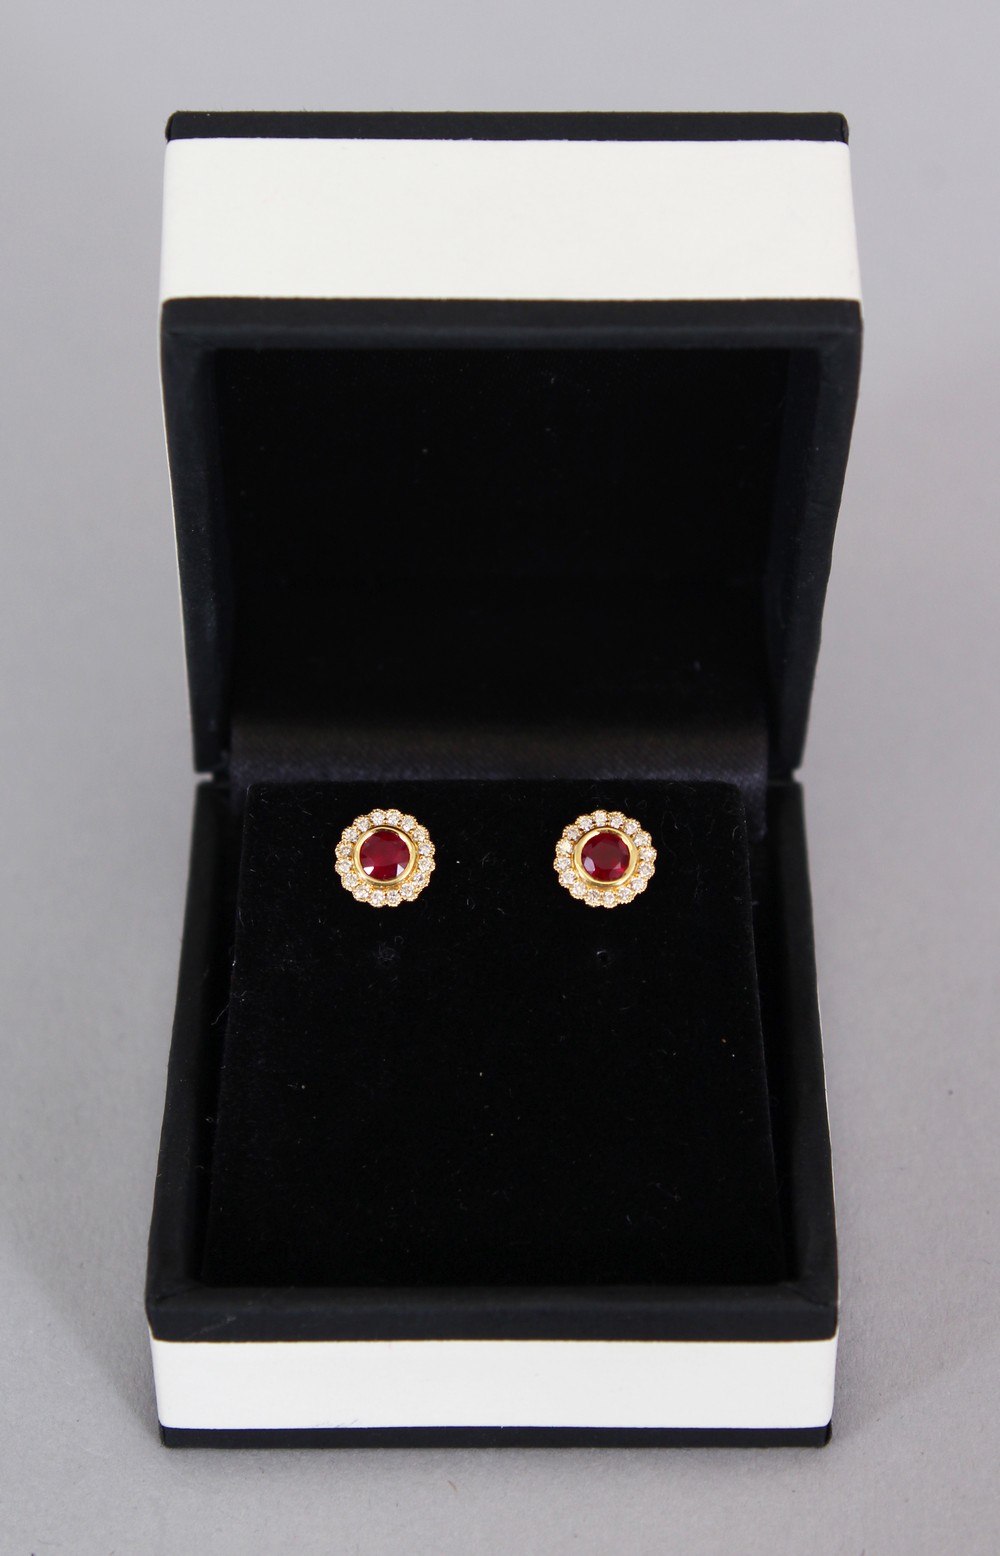 A PAIR OF 18CT YELLOW GOLD RUBY AND DIAMOND EARRINGS.